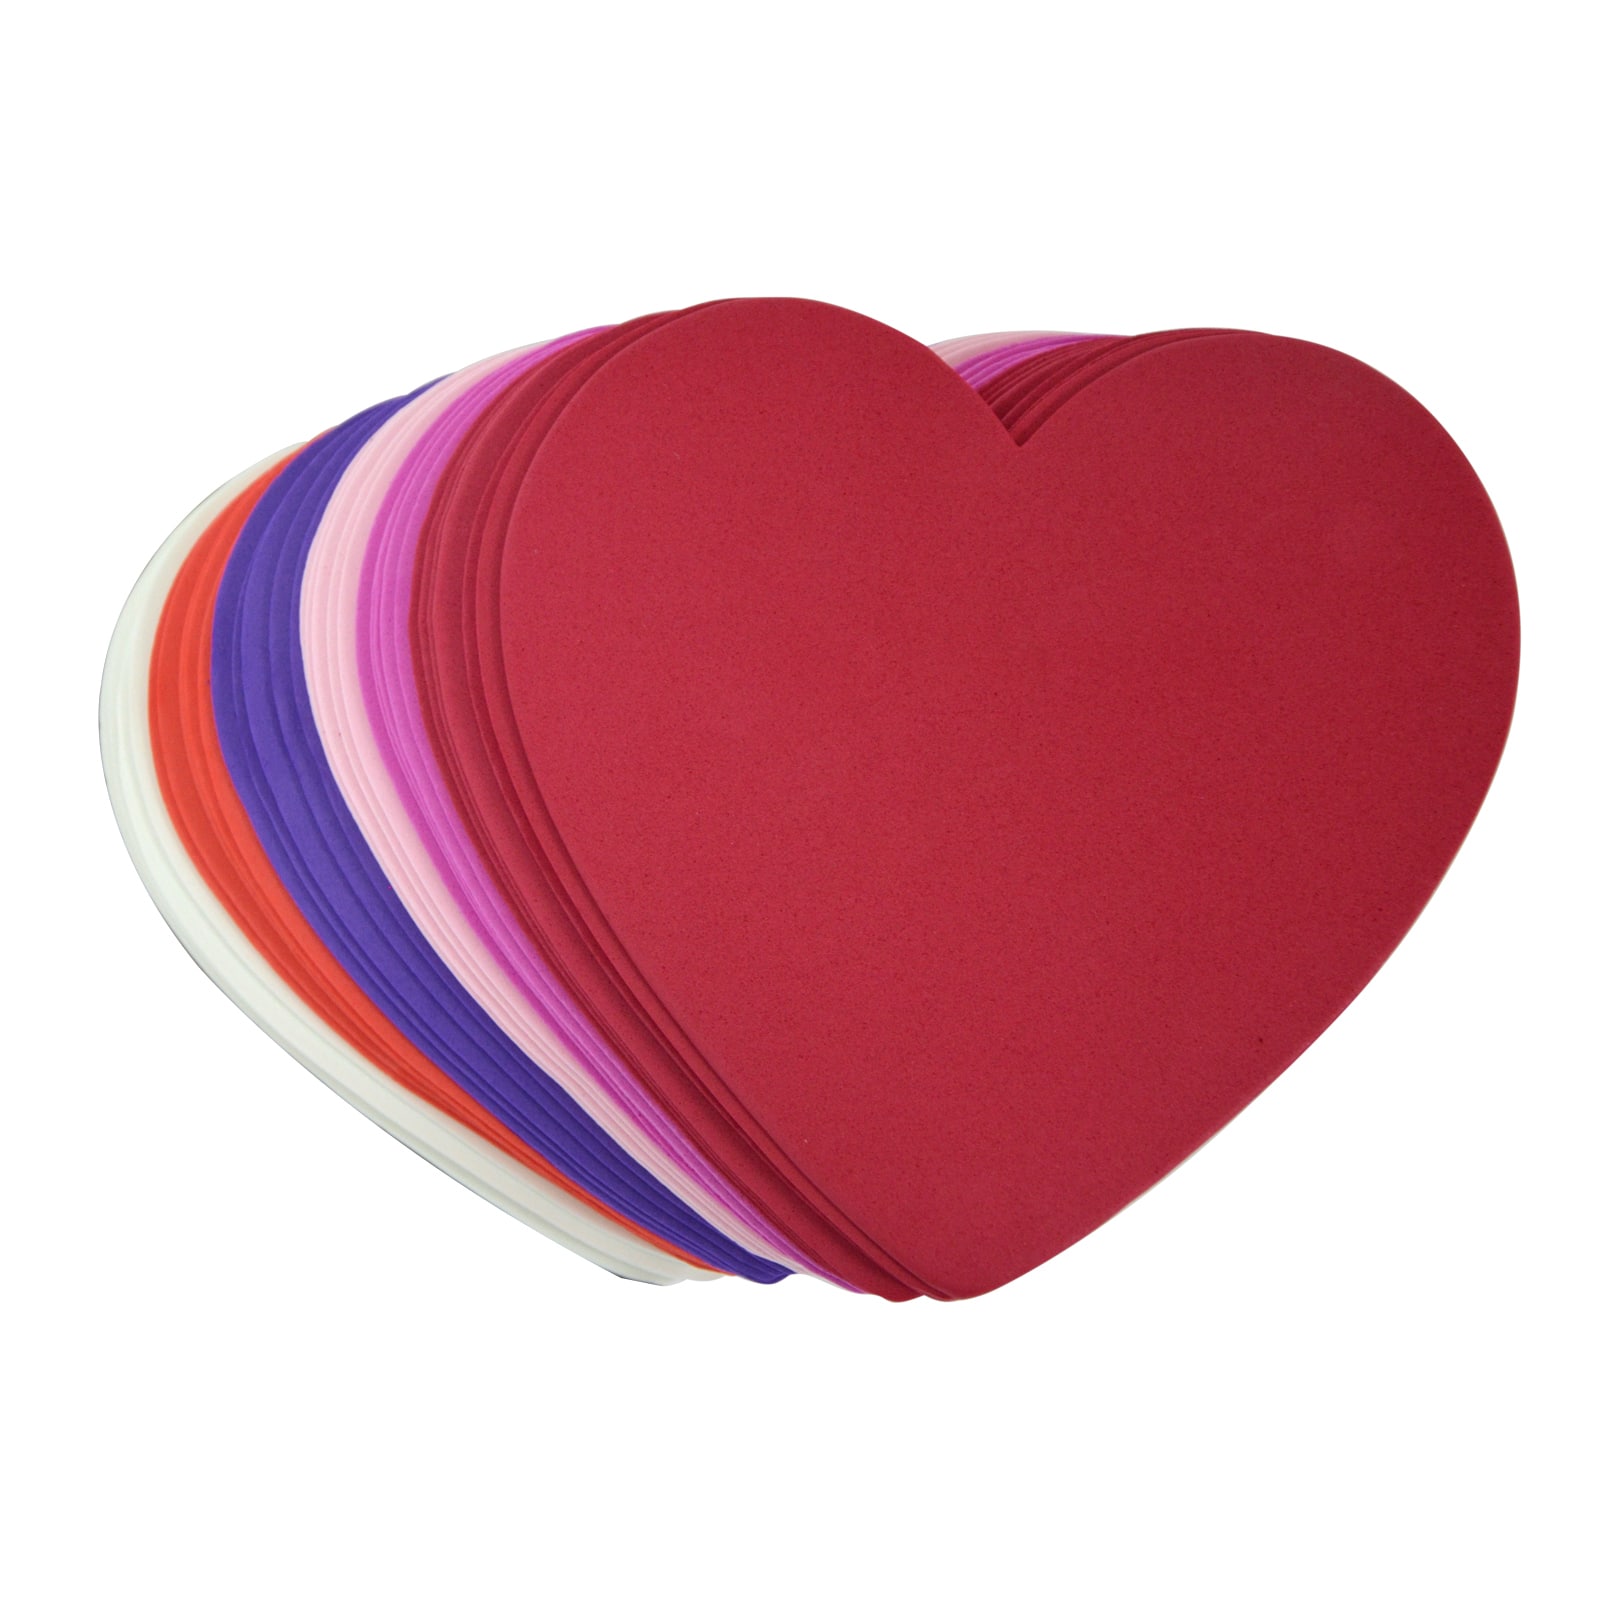 Valentine's Day Xoxo Love Heart Foam Stickers, 120ct. by Creatology | Michaels